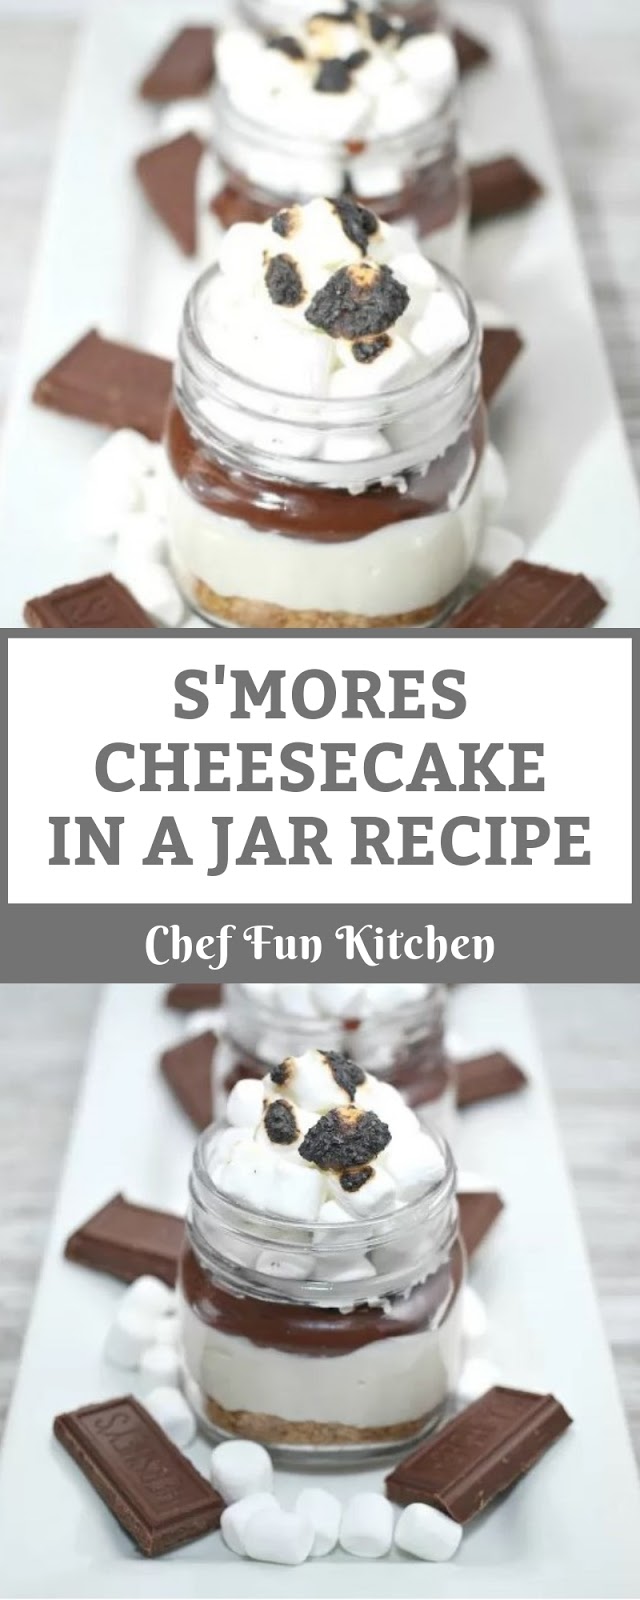 S'MORES CHEESECAKE IN A JAR RECIPE